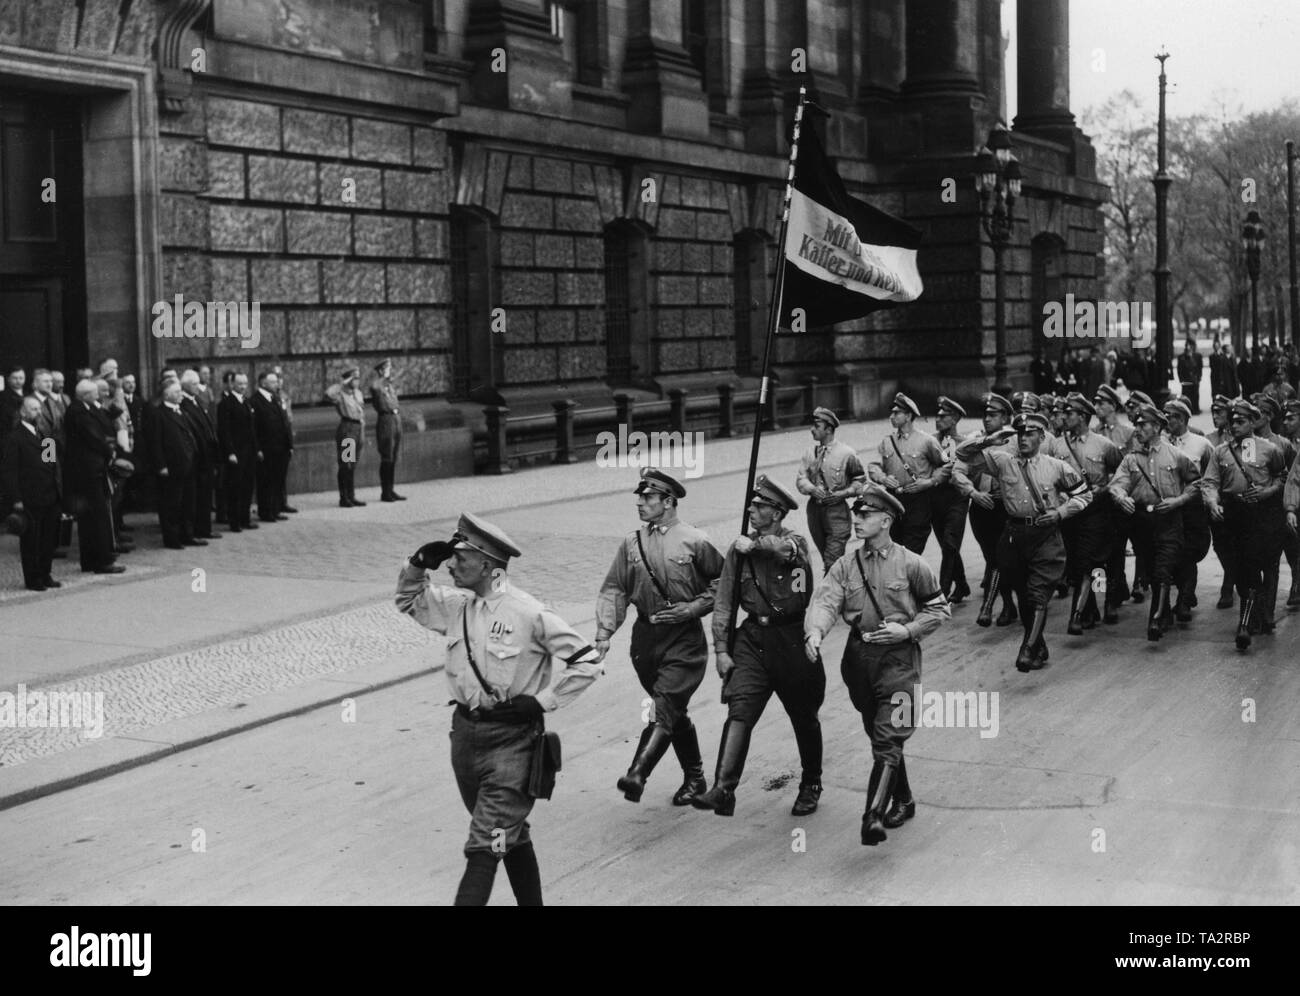 At the board meeting of the German National People's Party in the Reichstag, a division of the Kampfring junger Deutschnationaler marched to the 5th portal of the Reichstag in honor of Adolf Hitler. On the left, the leadership of the DNVP. In the center chairman of the party, Alfred Hugenberg. Stock Photo